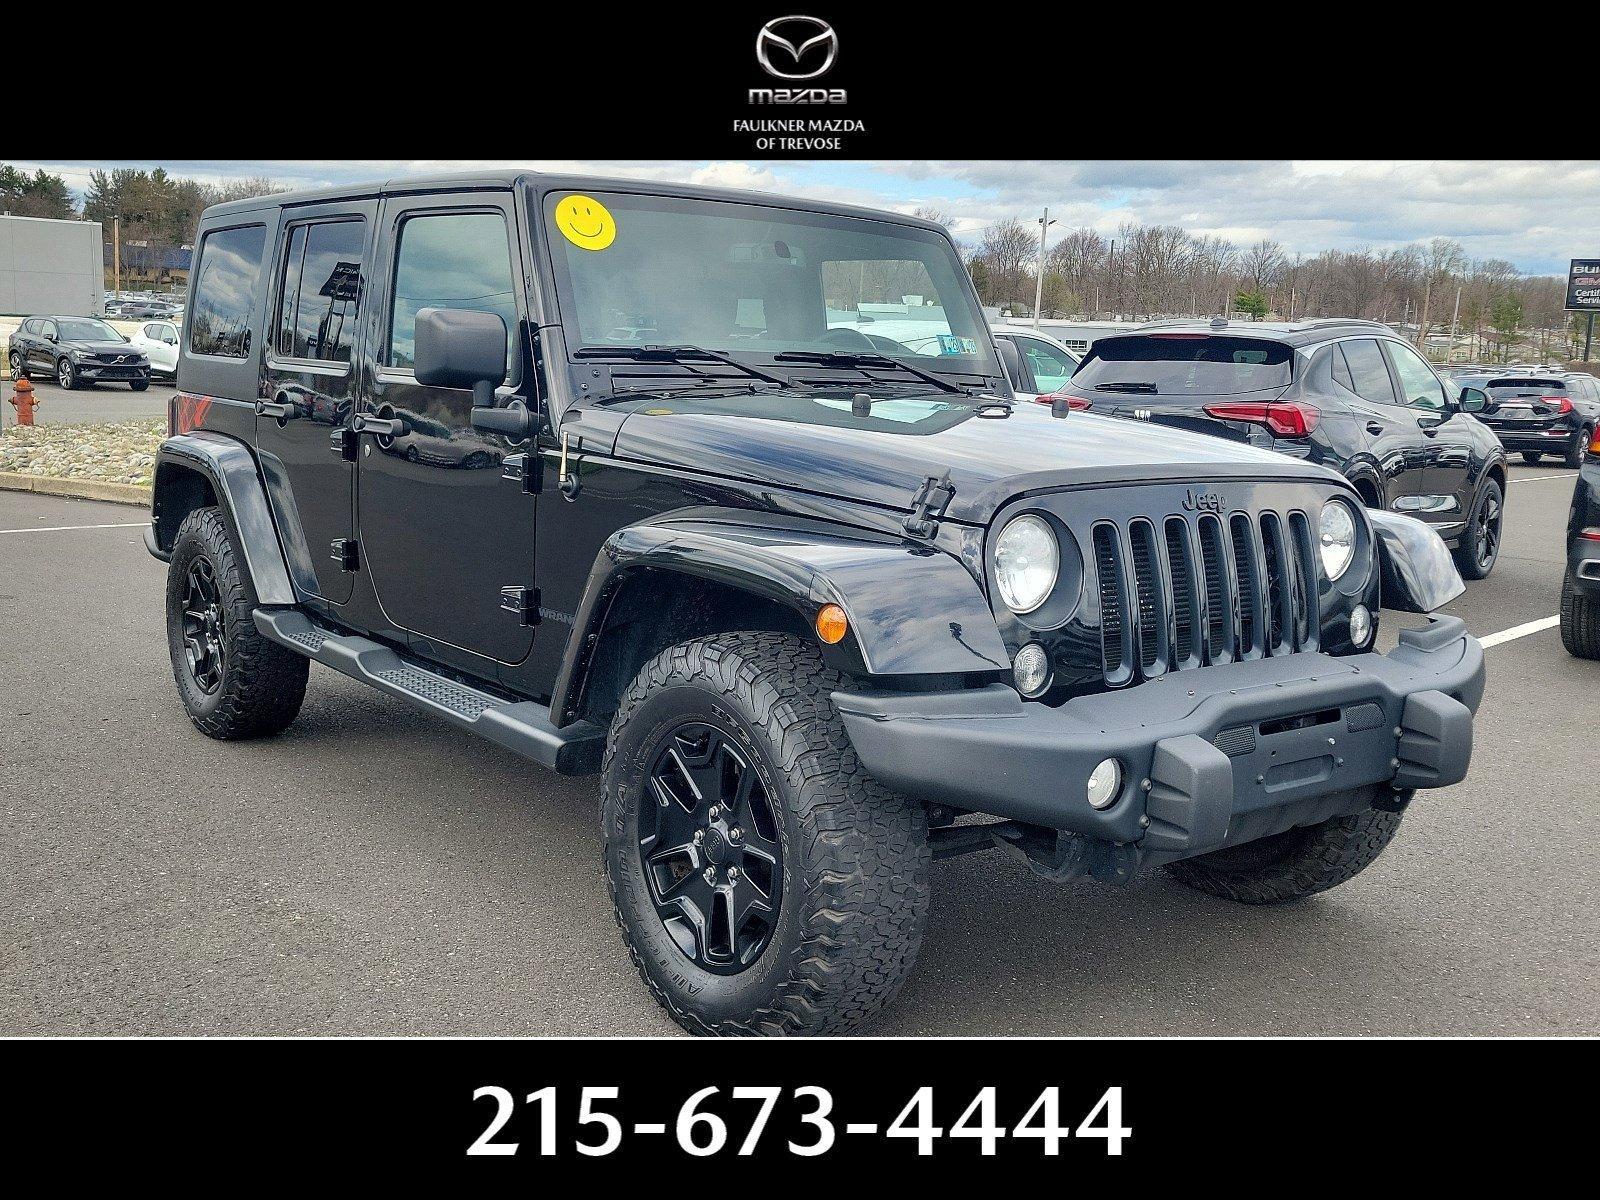 2016 Jeep Wrangler Unlimited Vehicle Photo in Trevose, PA 19053